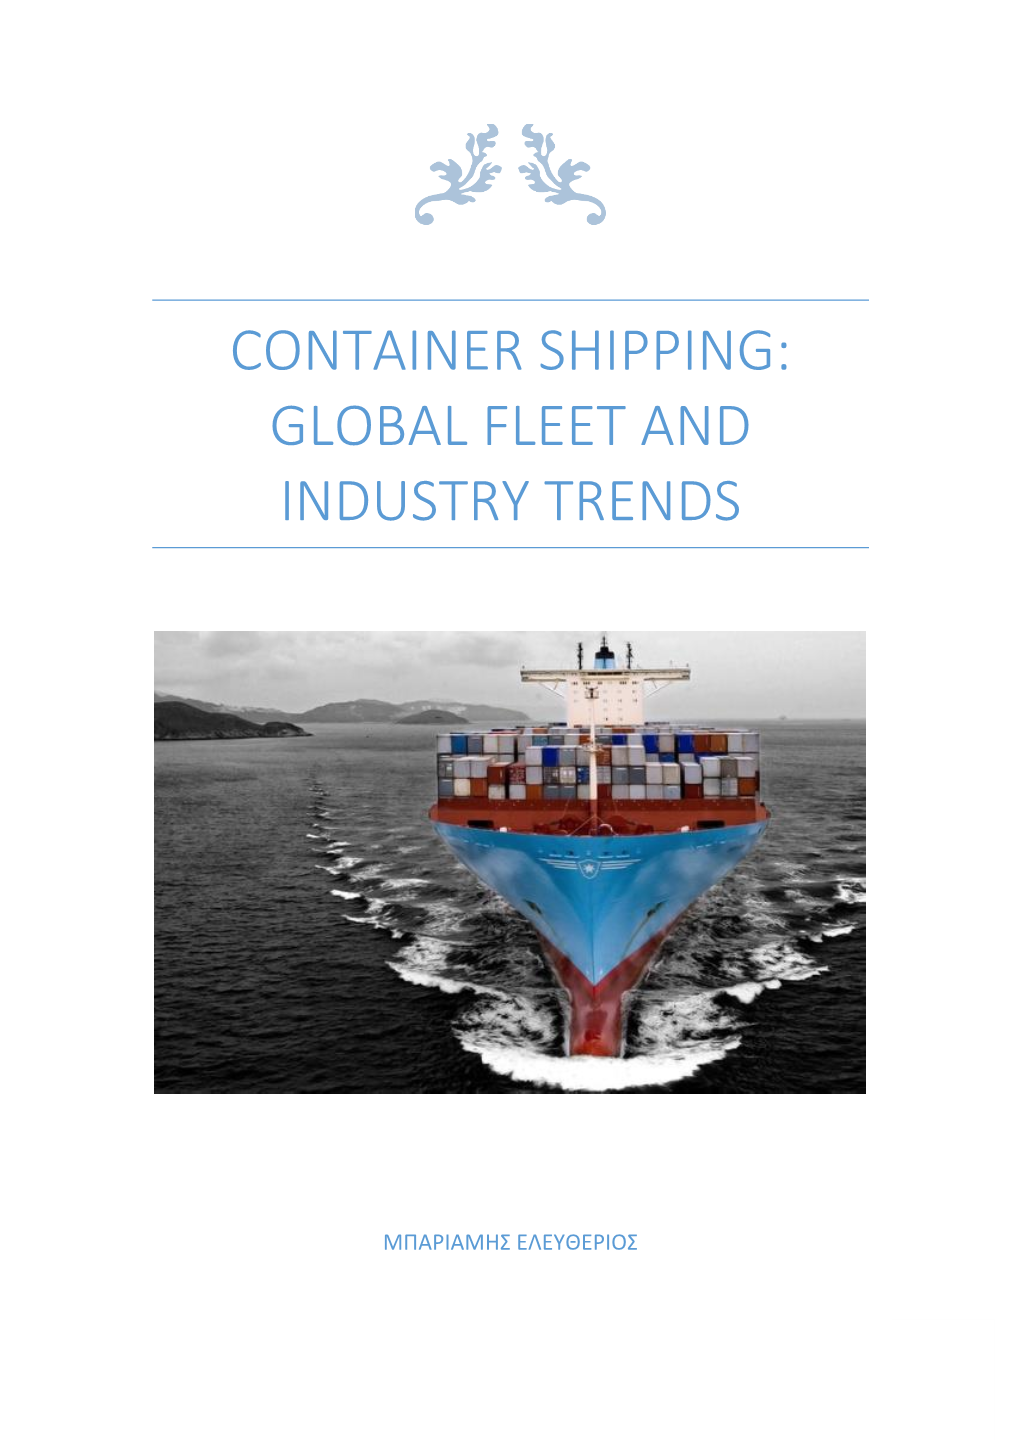 Container Shipping: Global Fleet and Industry Trends